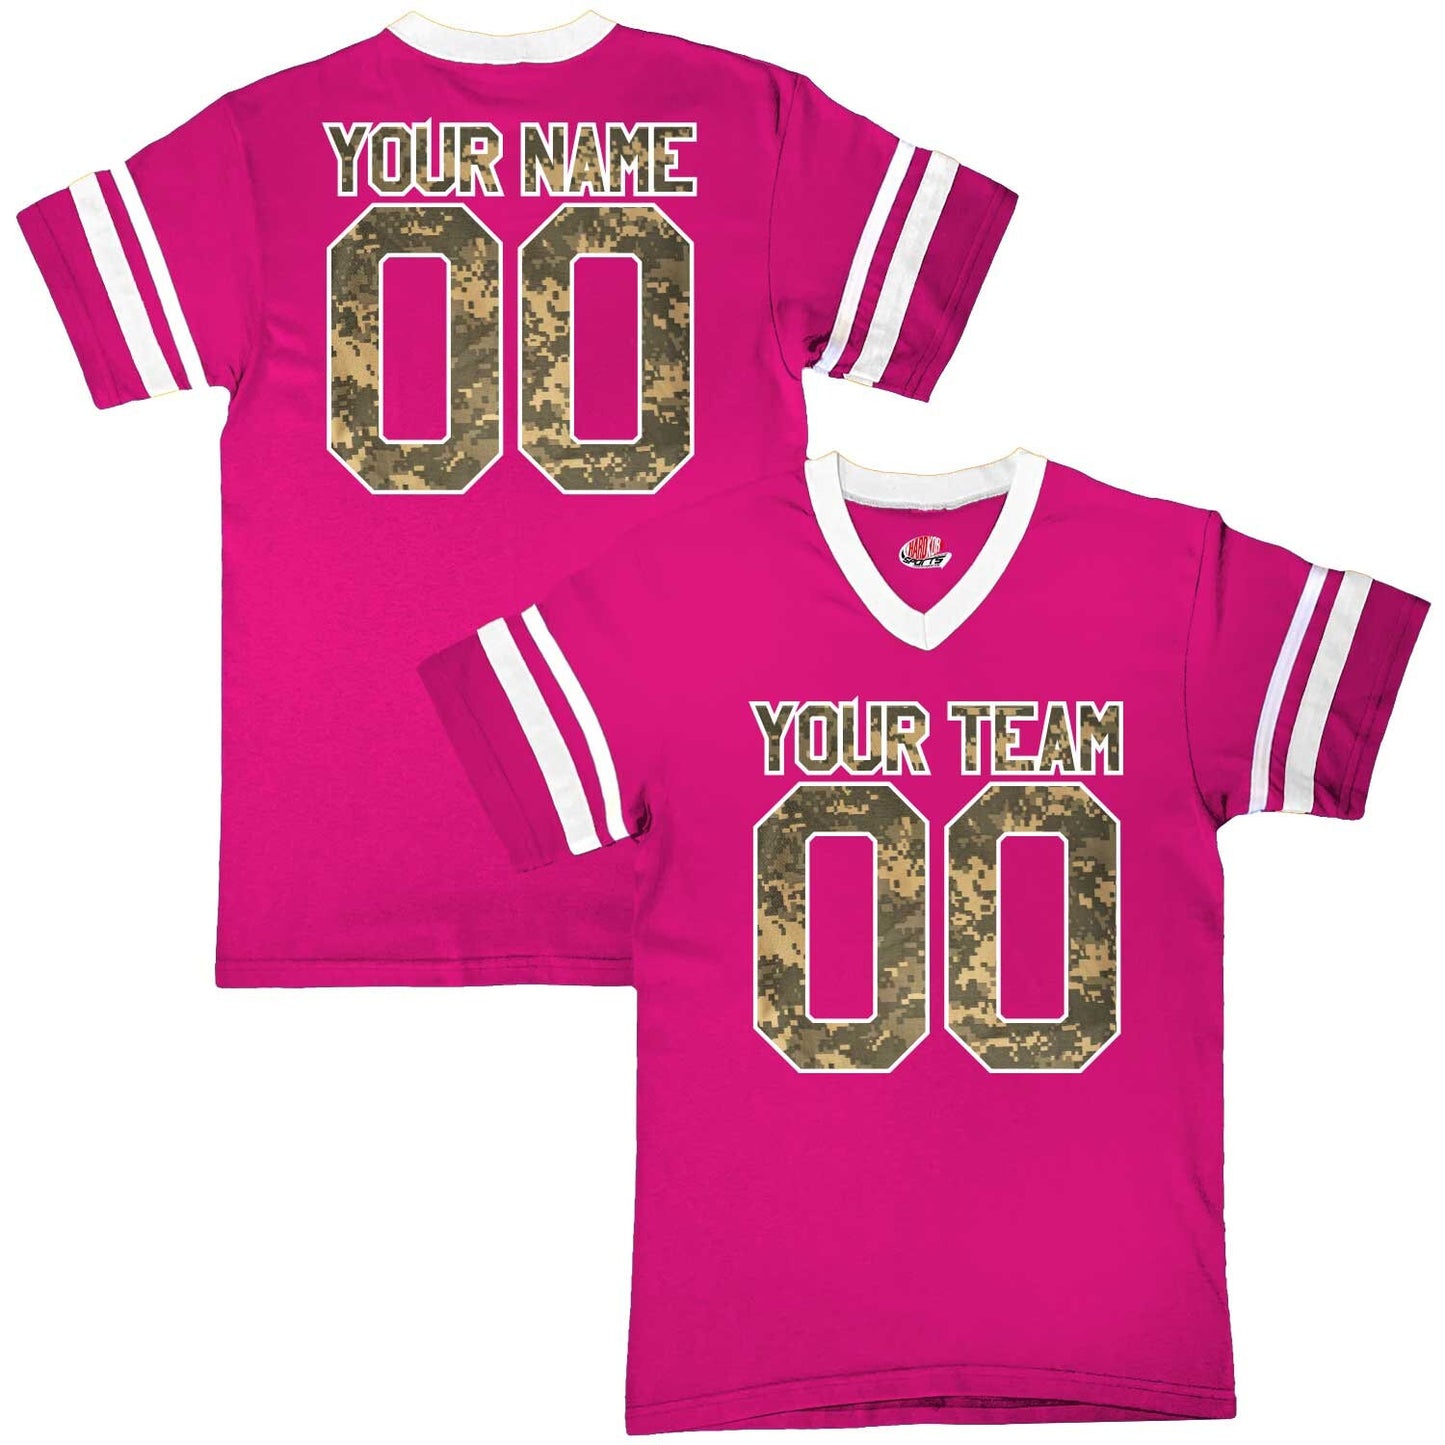 Stripe Sleeve Fan Wear Custom Football Jerseys with Digital Desert Camo Print Camouflage Design - Your Names and Numbers